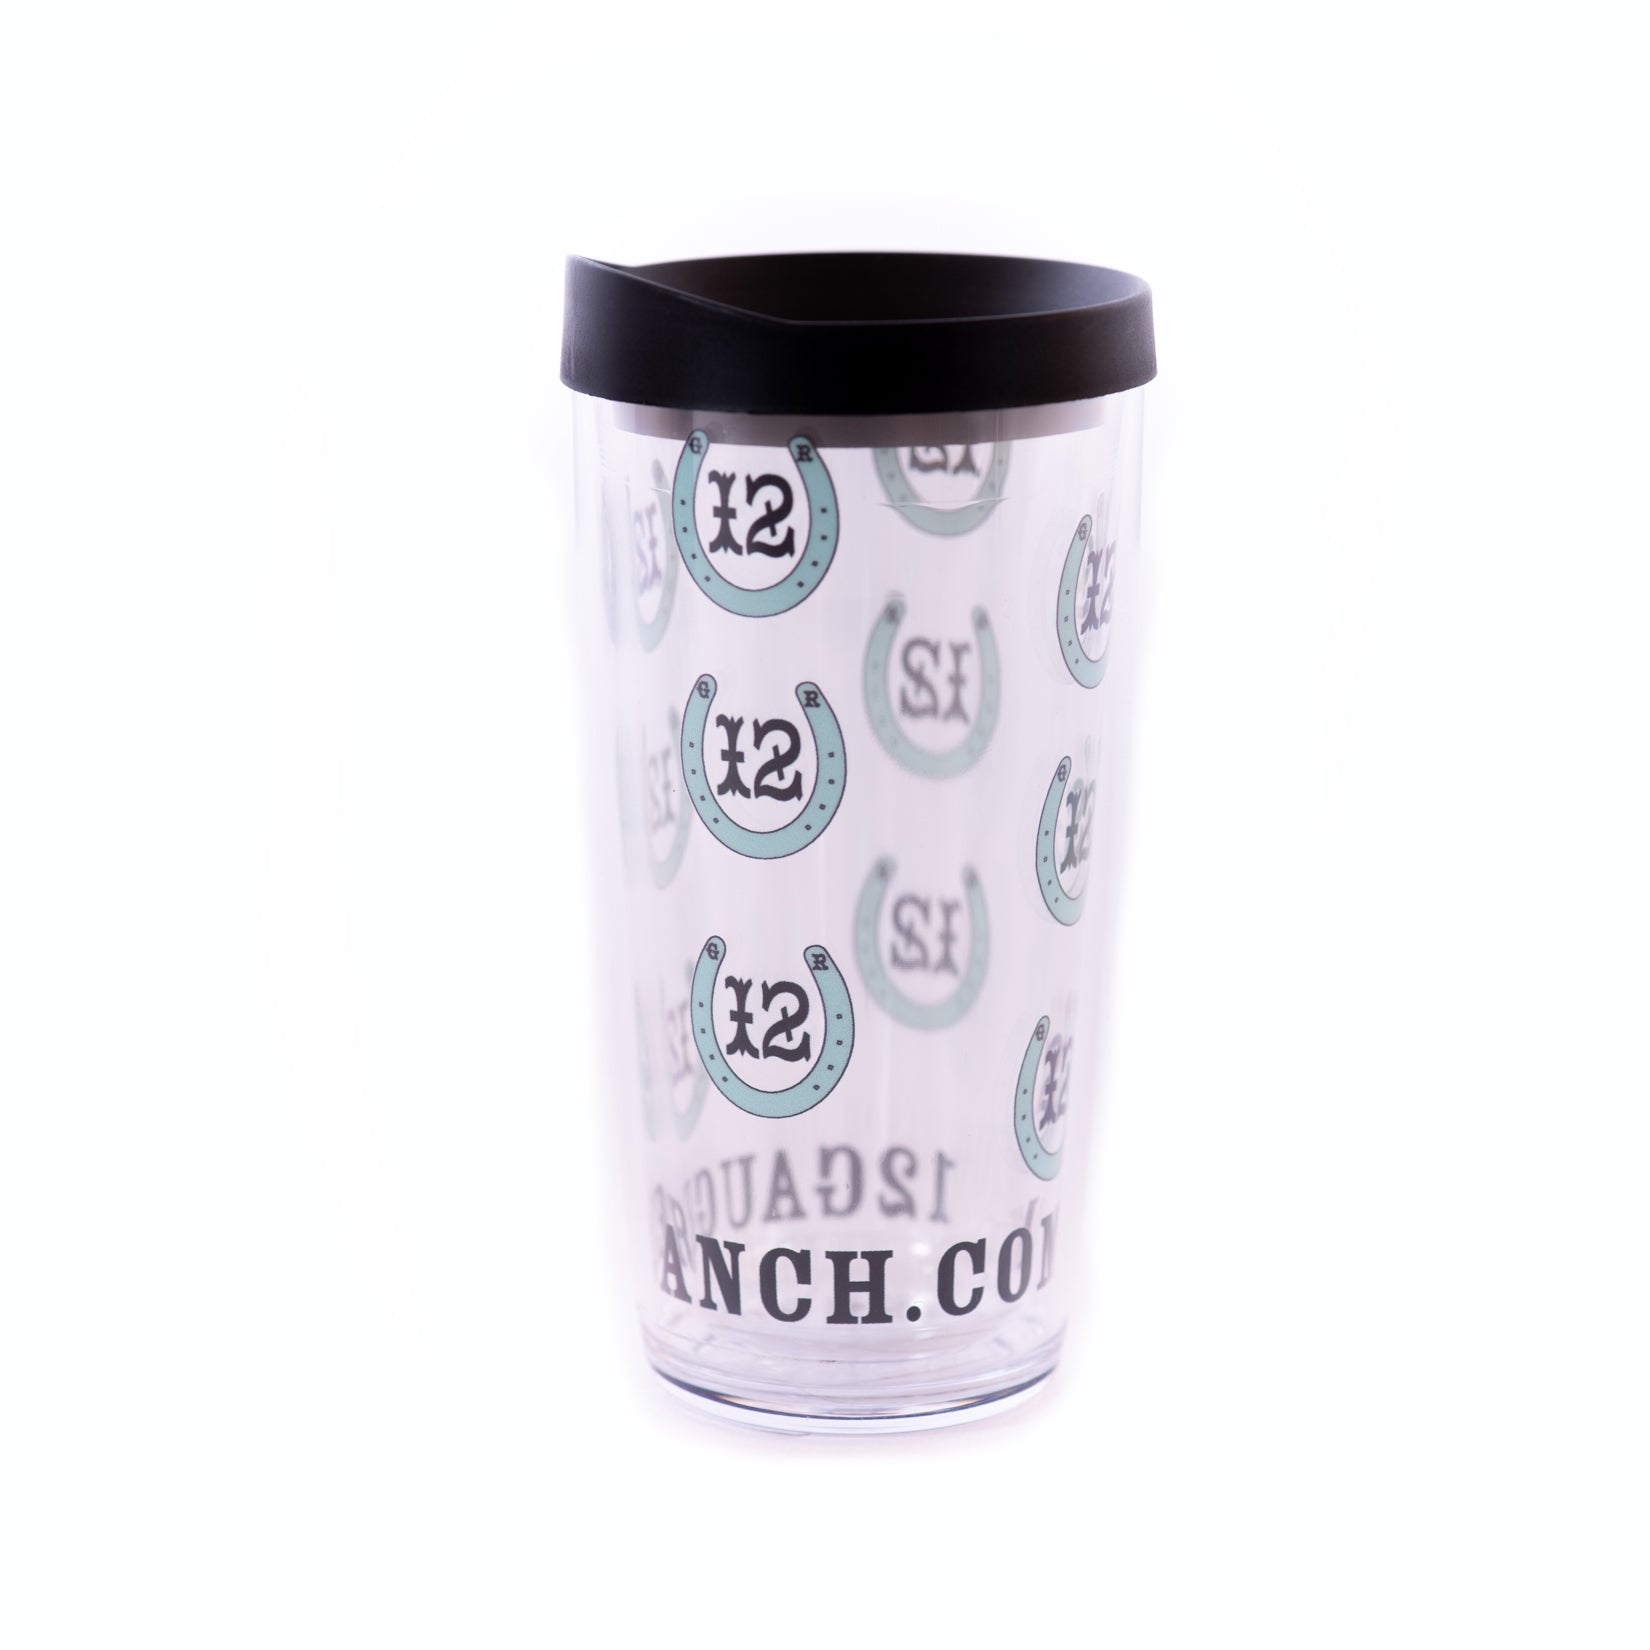 12 Gauge Teal Horseshoes 16oz Insulated Covo Cup, Accessories, 12 Gauge Ranch, 12 Gauge Ranch Ranch  12 Gauge Ranch